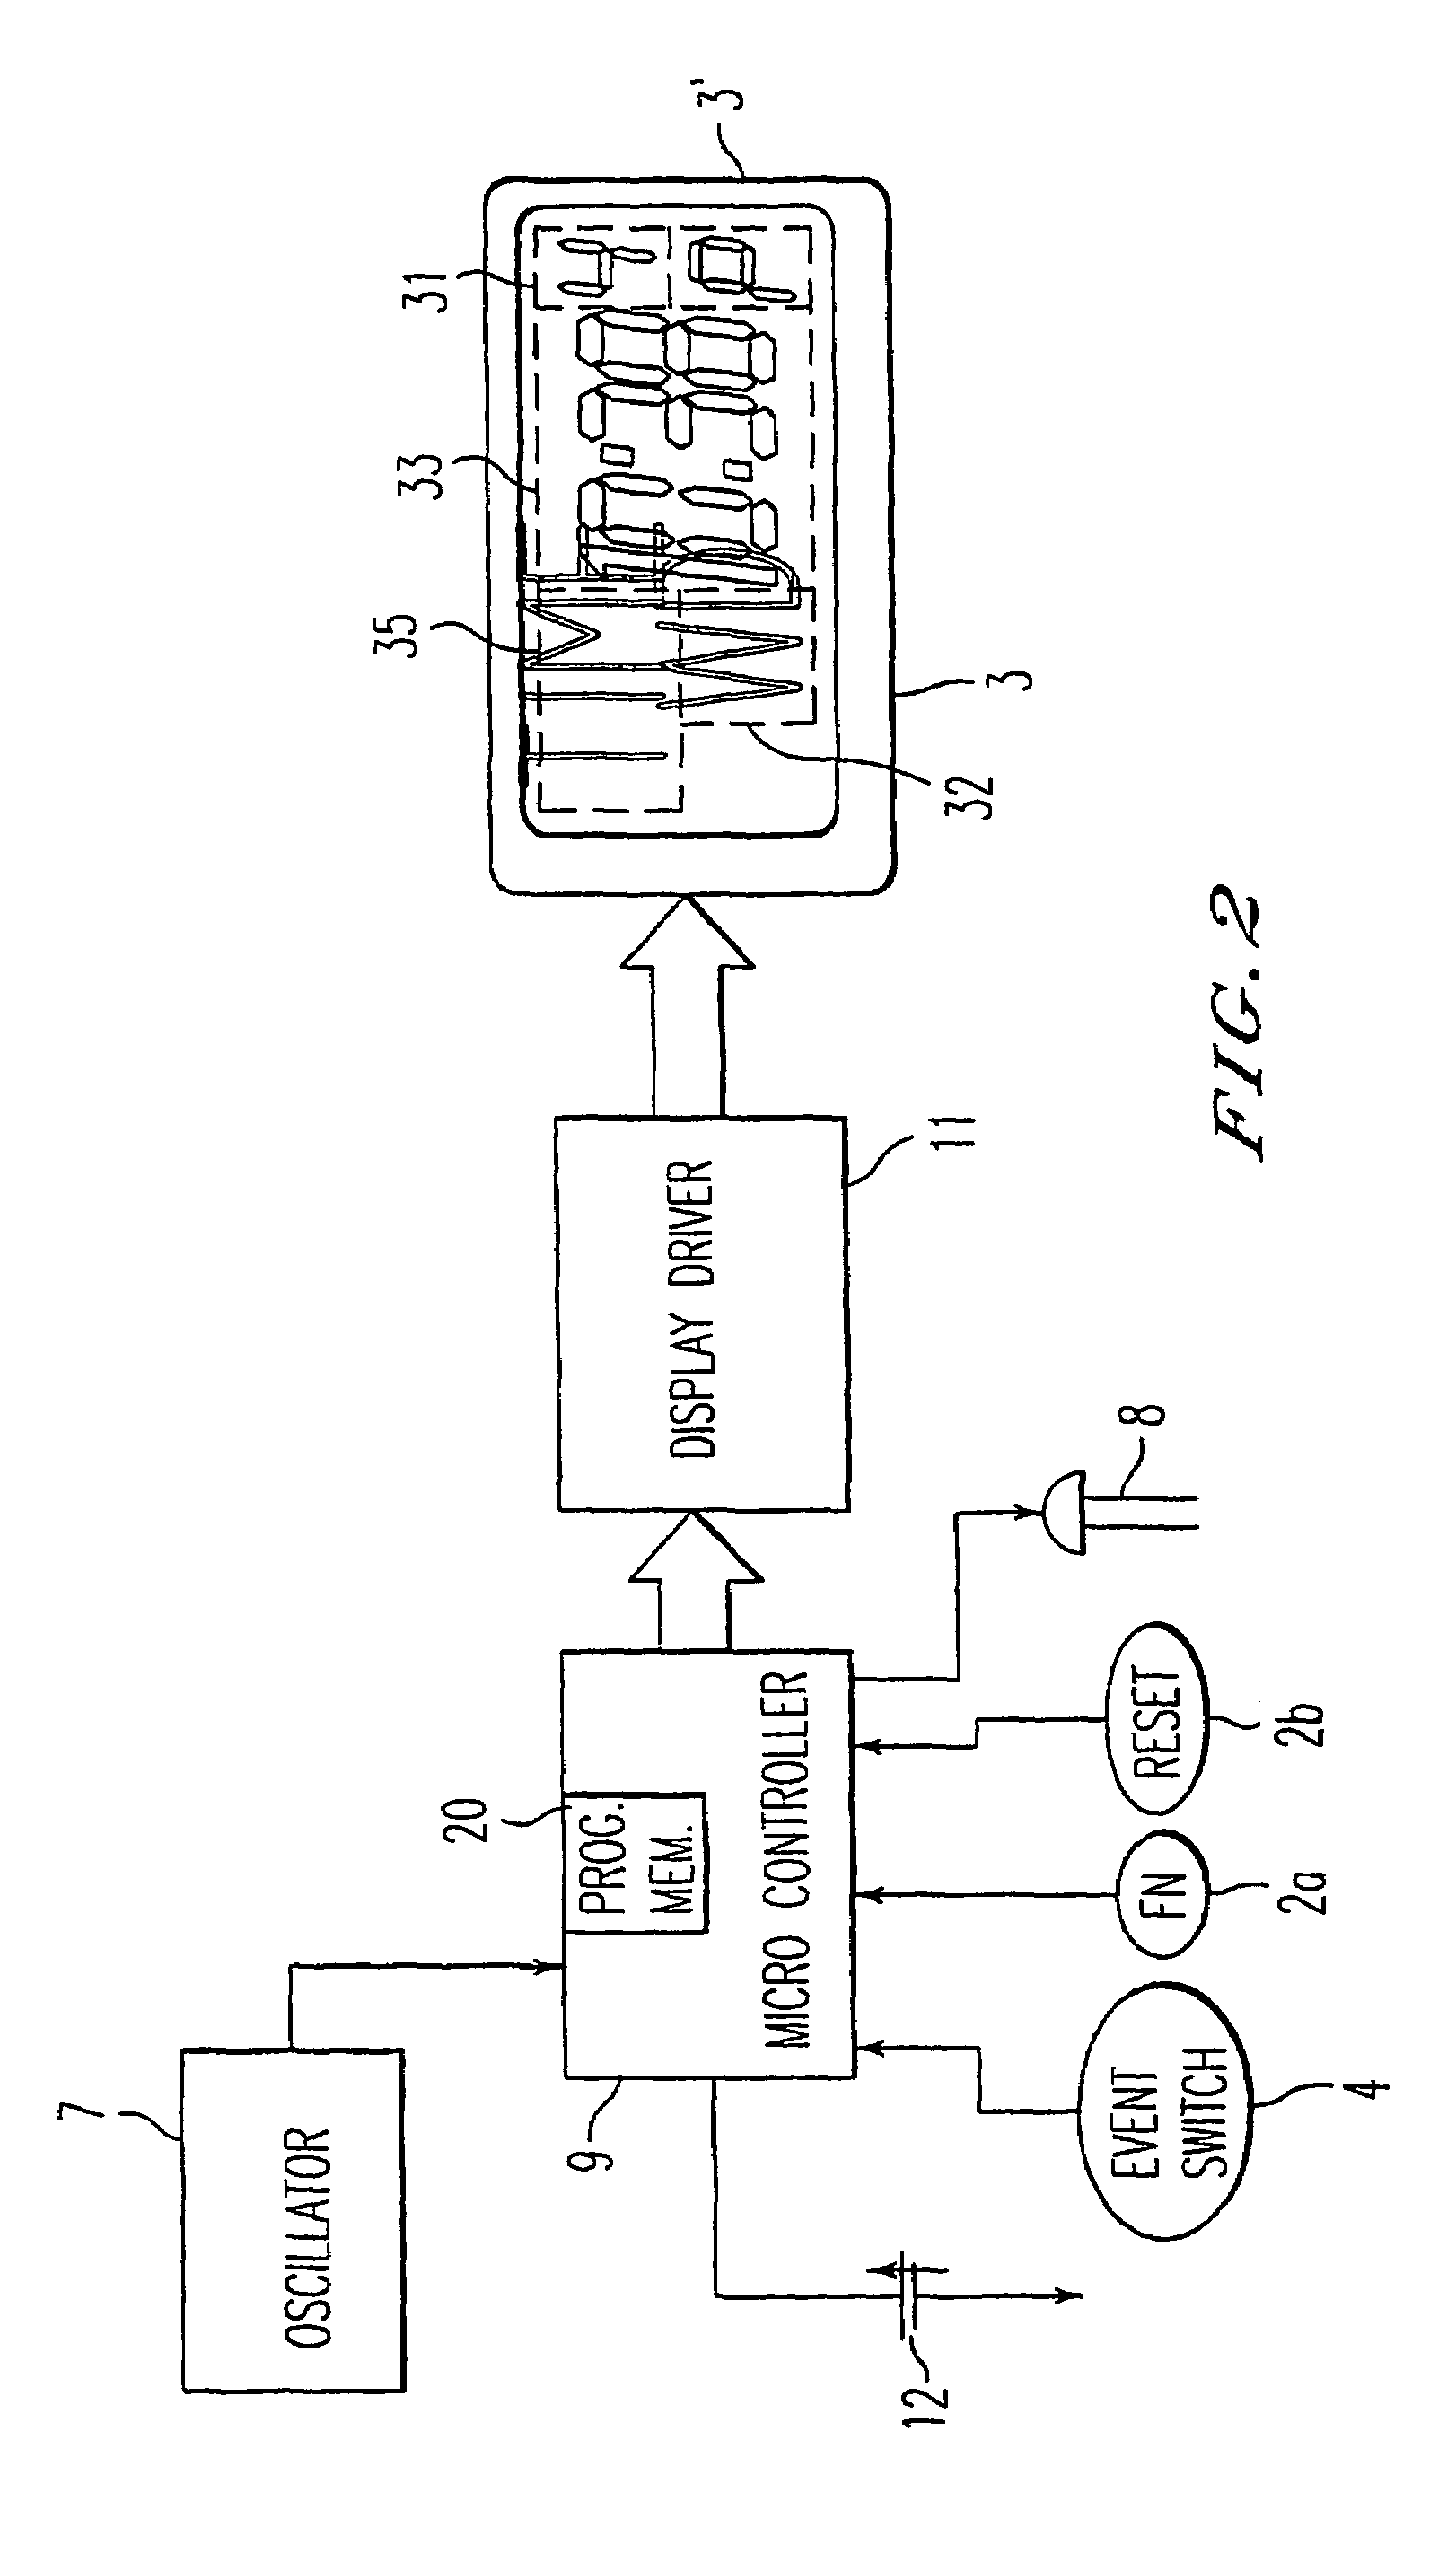 Prescription compliance device and method of using device